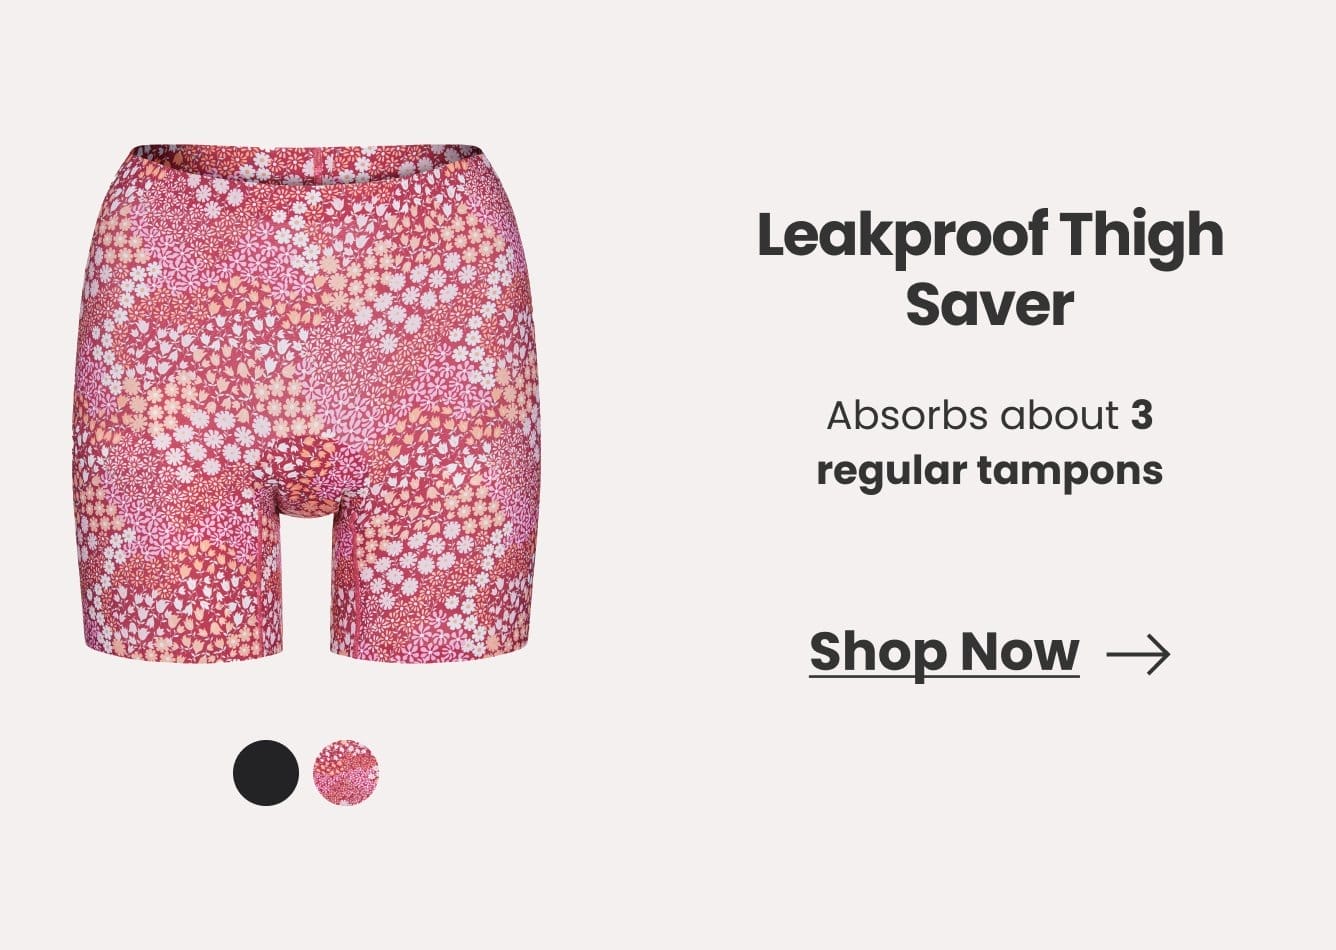 Leakproof Thigh Saver